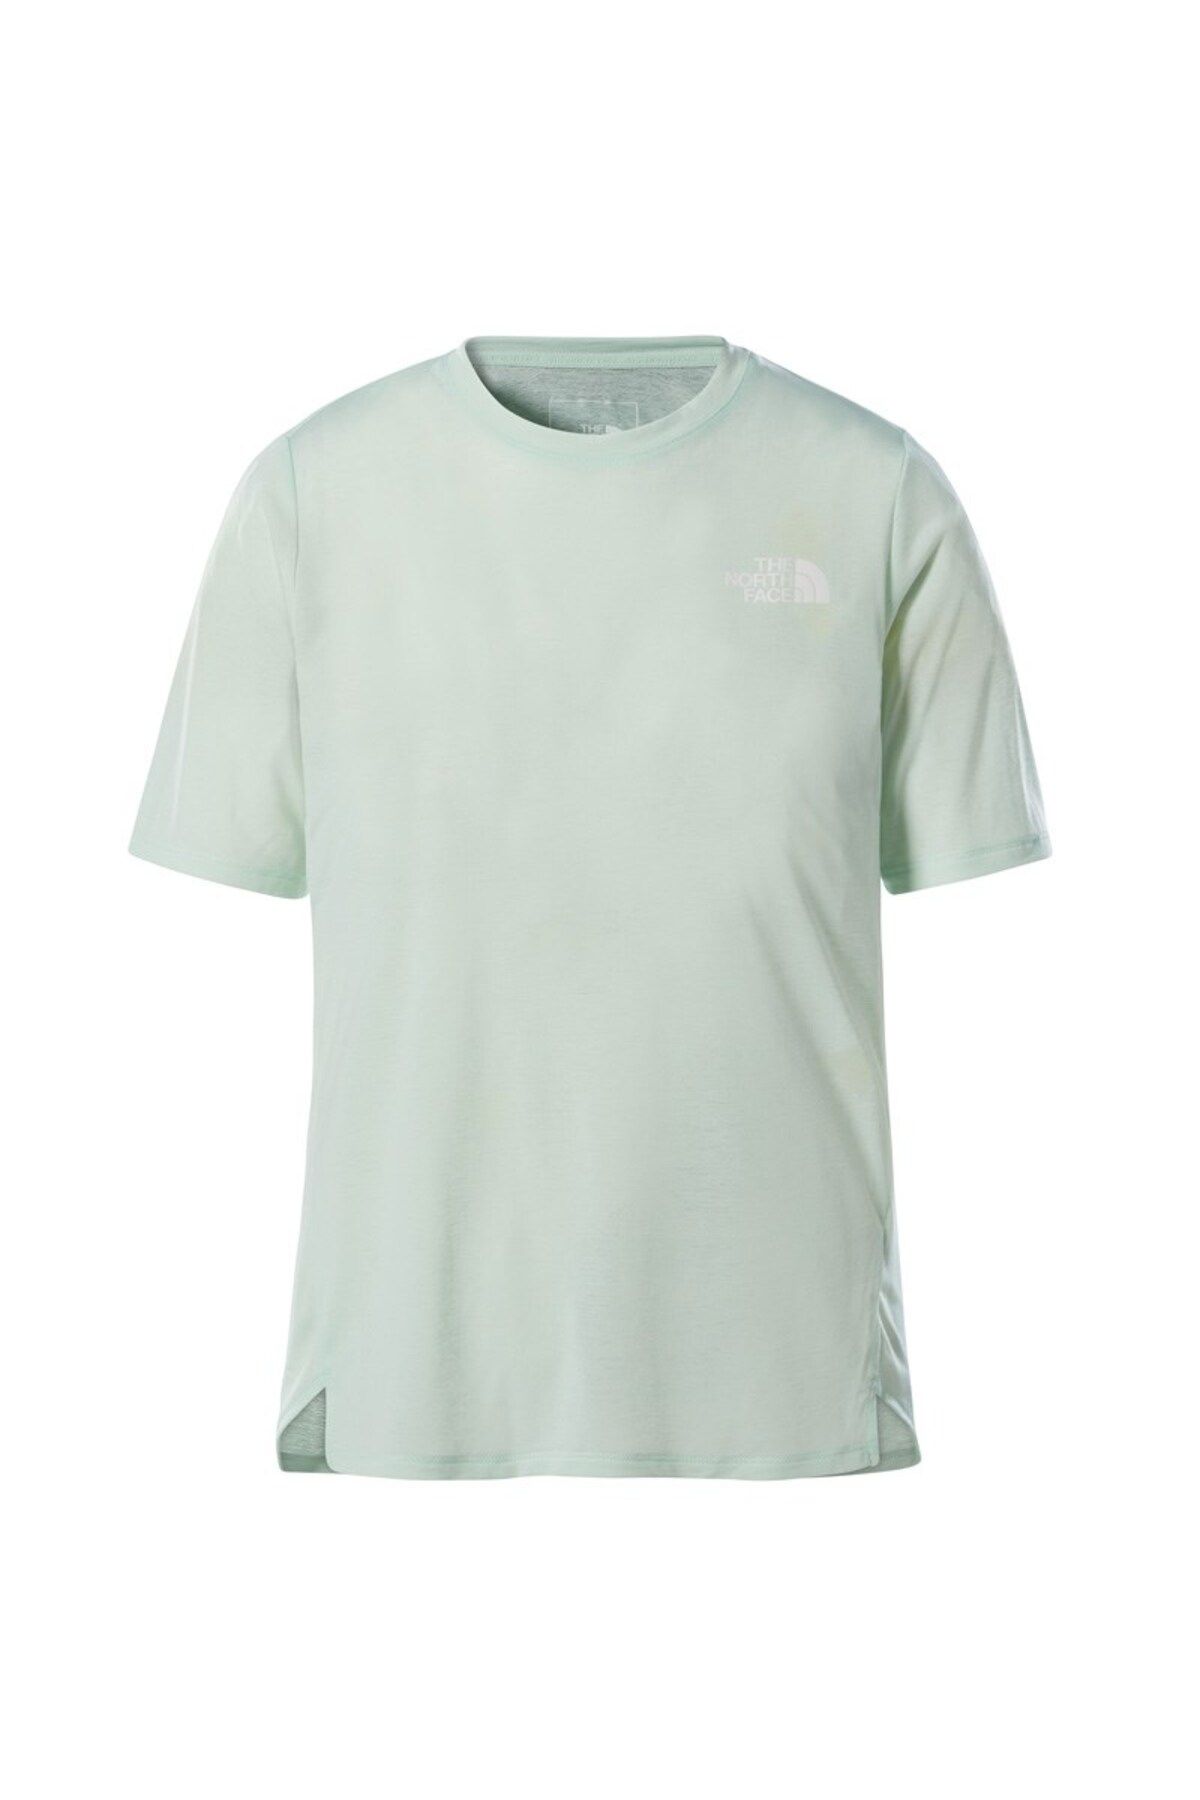 The North Face Up With The Sun Kadın T-shirt - T9538xwc7